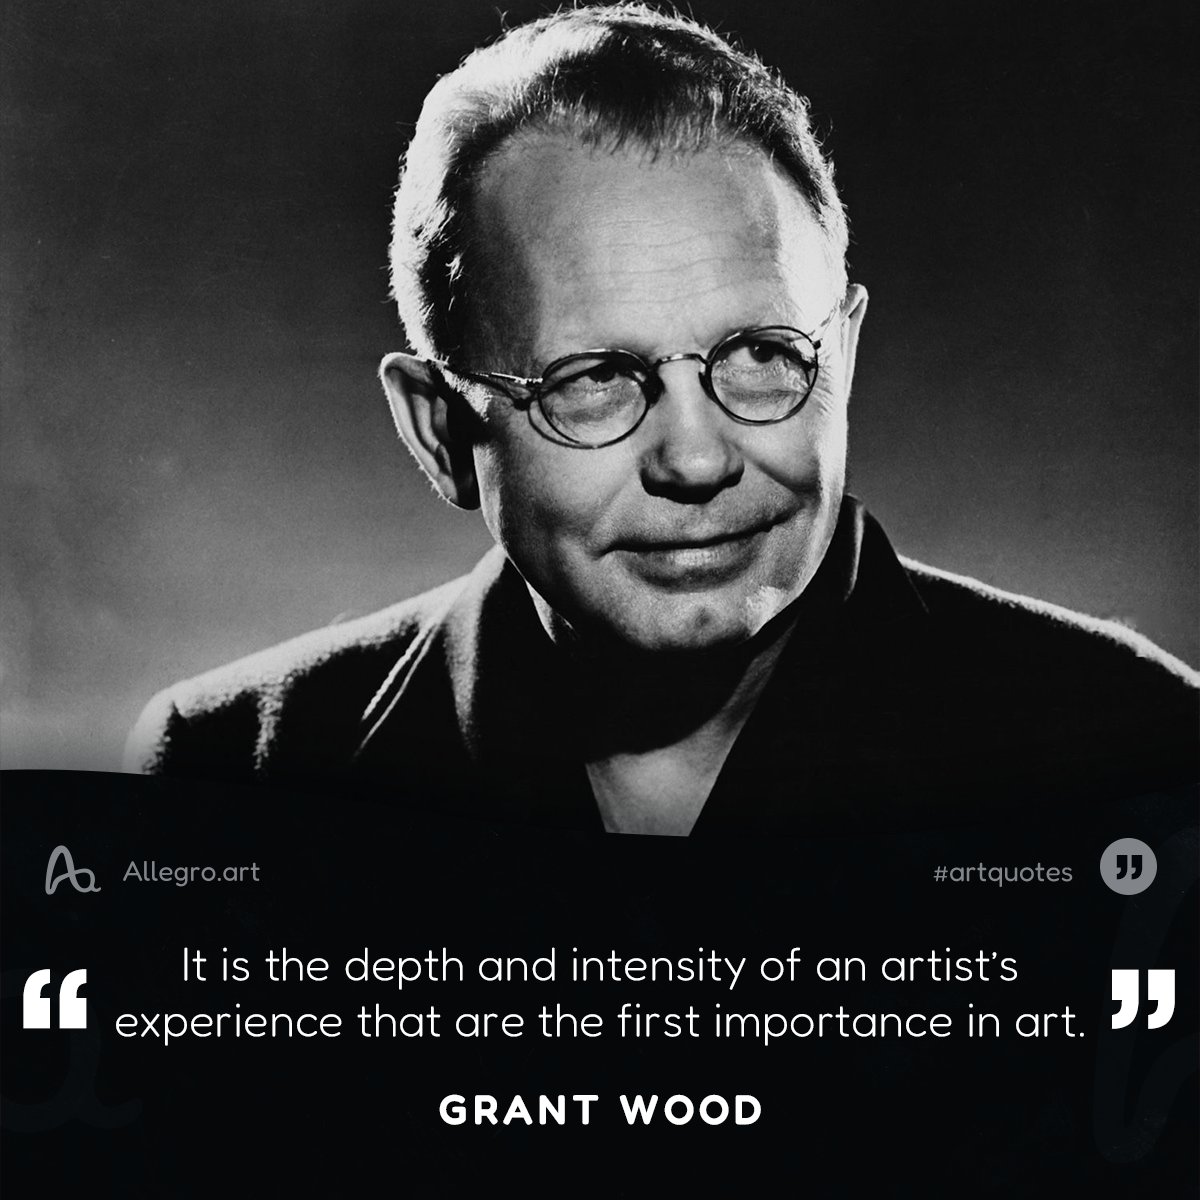 GM, Grant's wise words are what we need to start the week ☕️ #artquotes

“It is the depth and intensity of an artist’s experience that are the first importance in art.” — Grant Wood